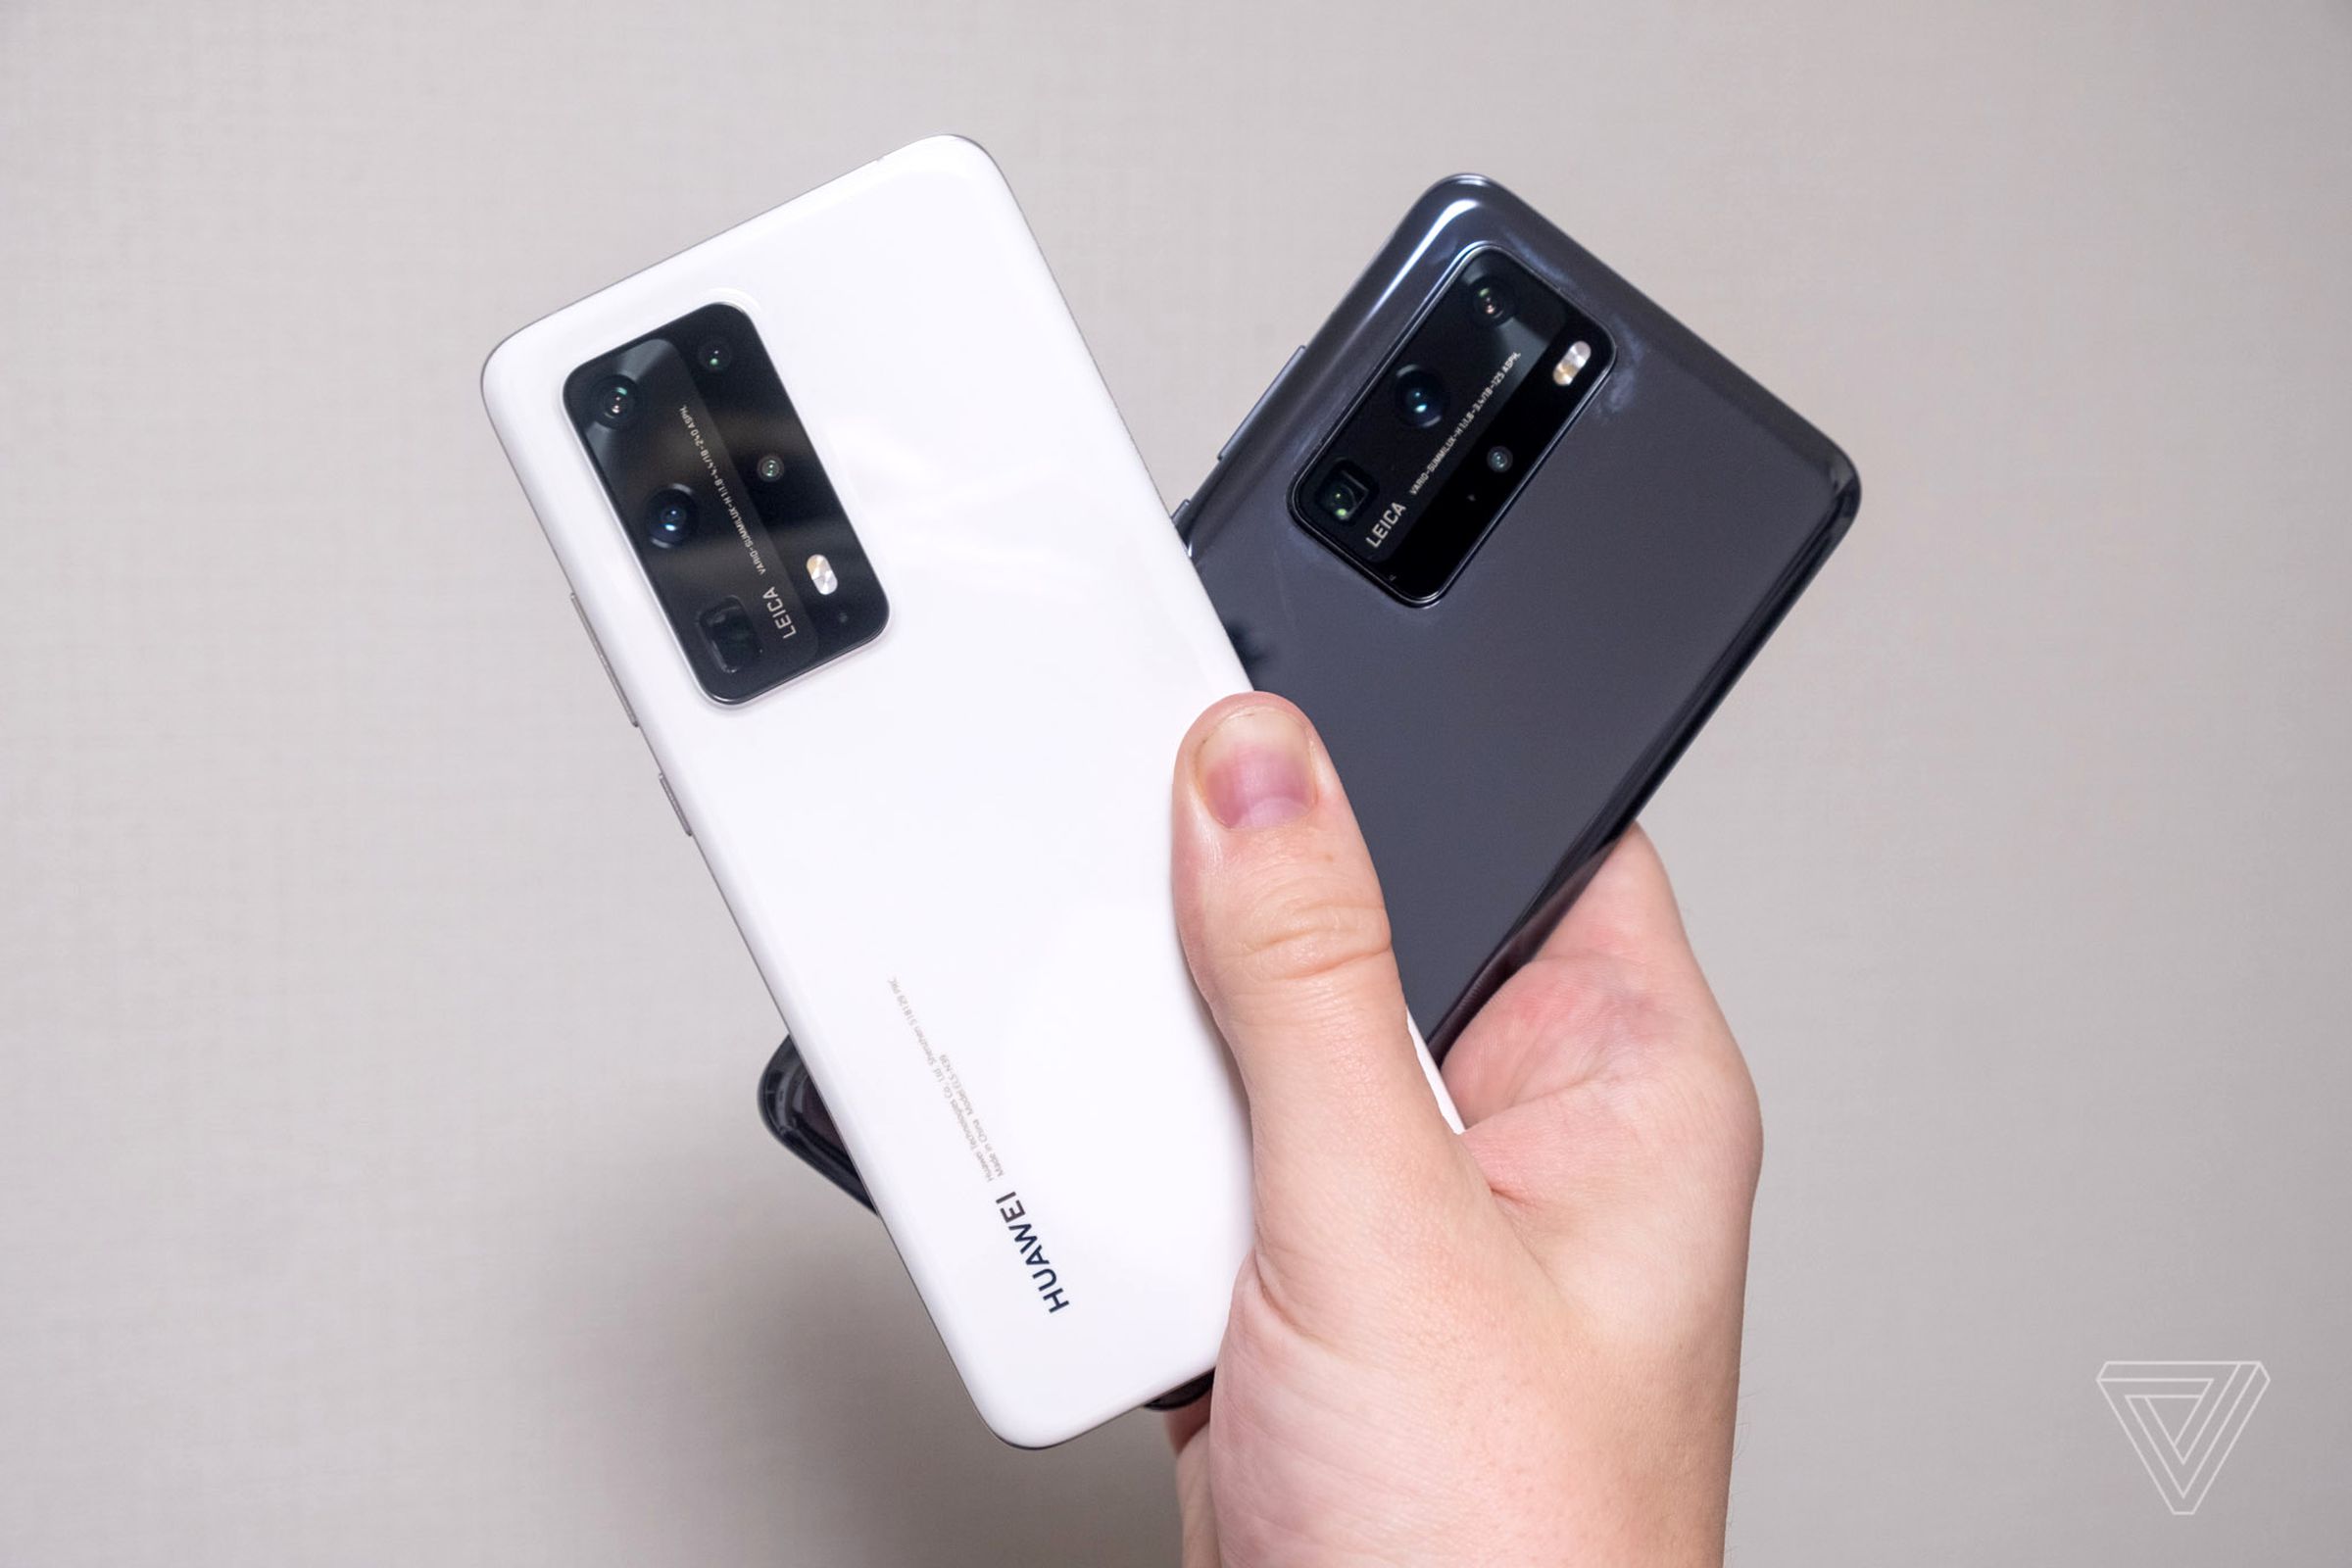 The Huawei P40 Pro Plus (left) and P40 Pro (right)